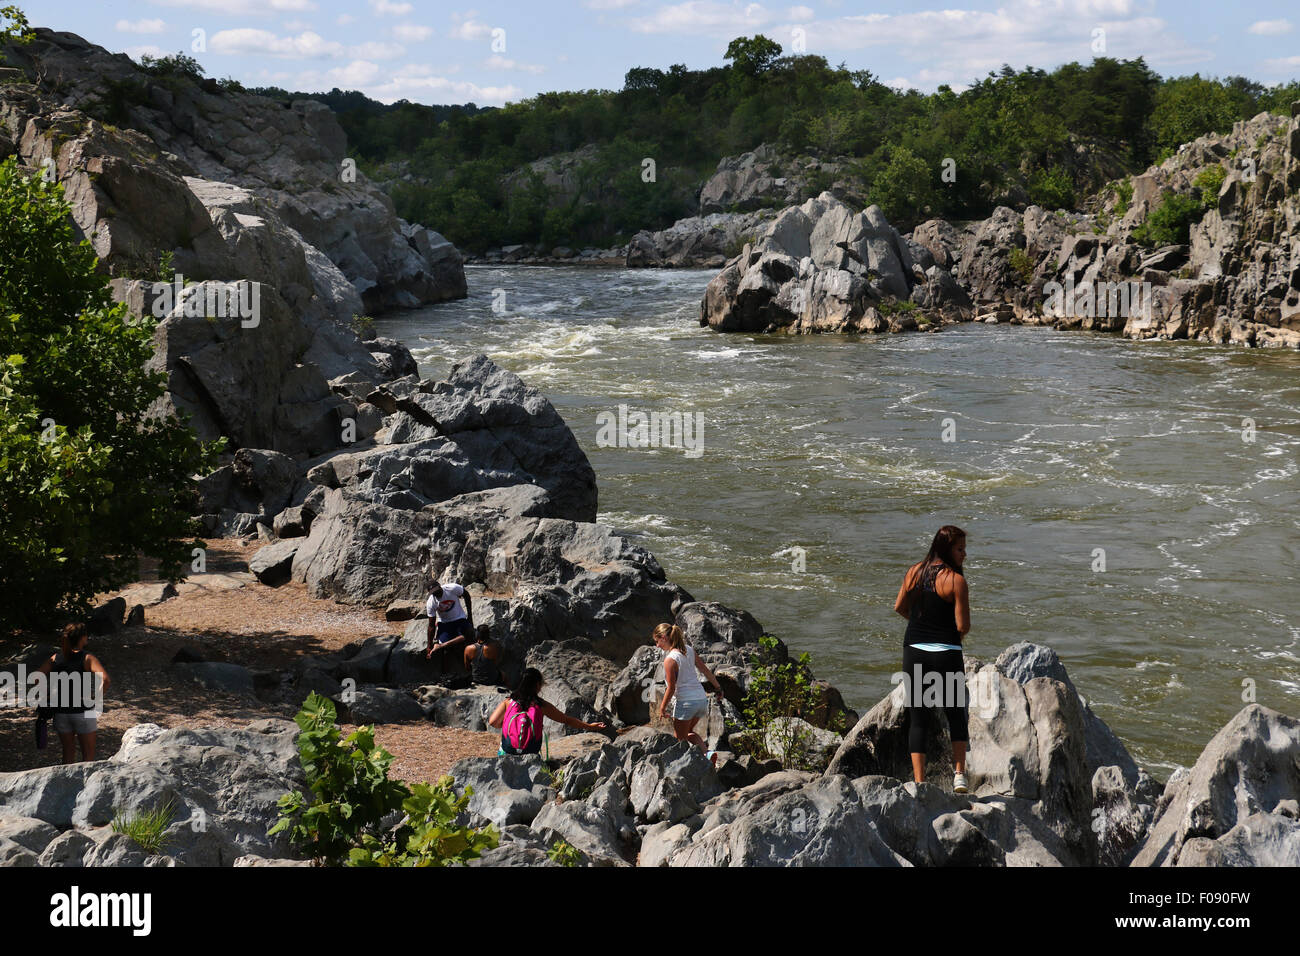 Hikers on rocks at the Great Falls of the Potomac River Maryland Stock Photo